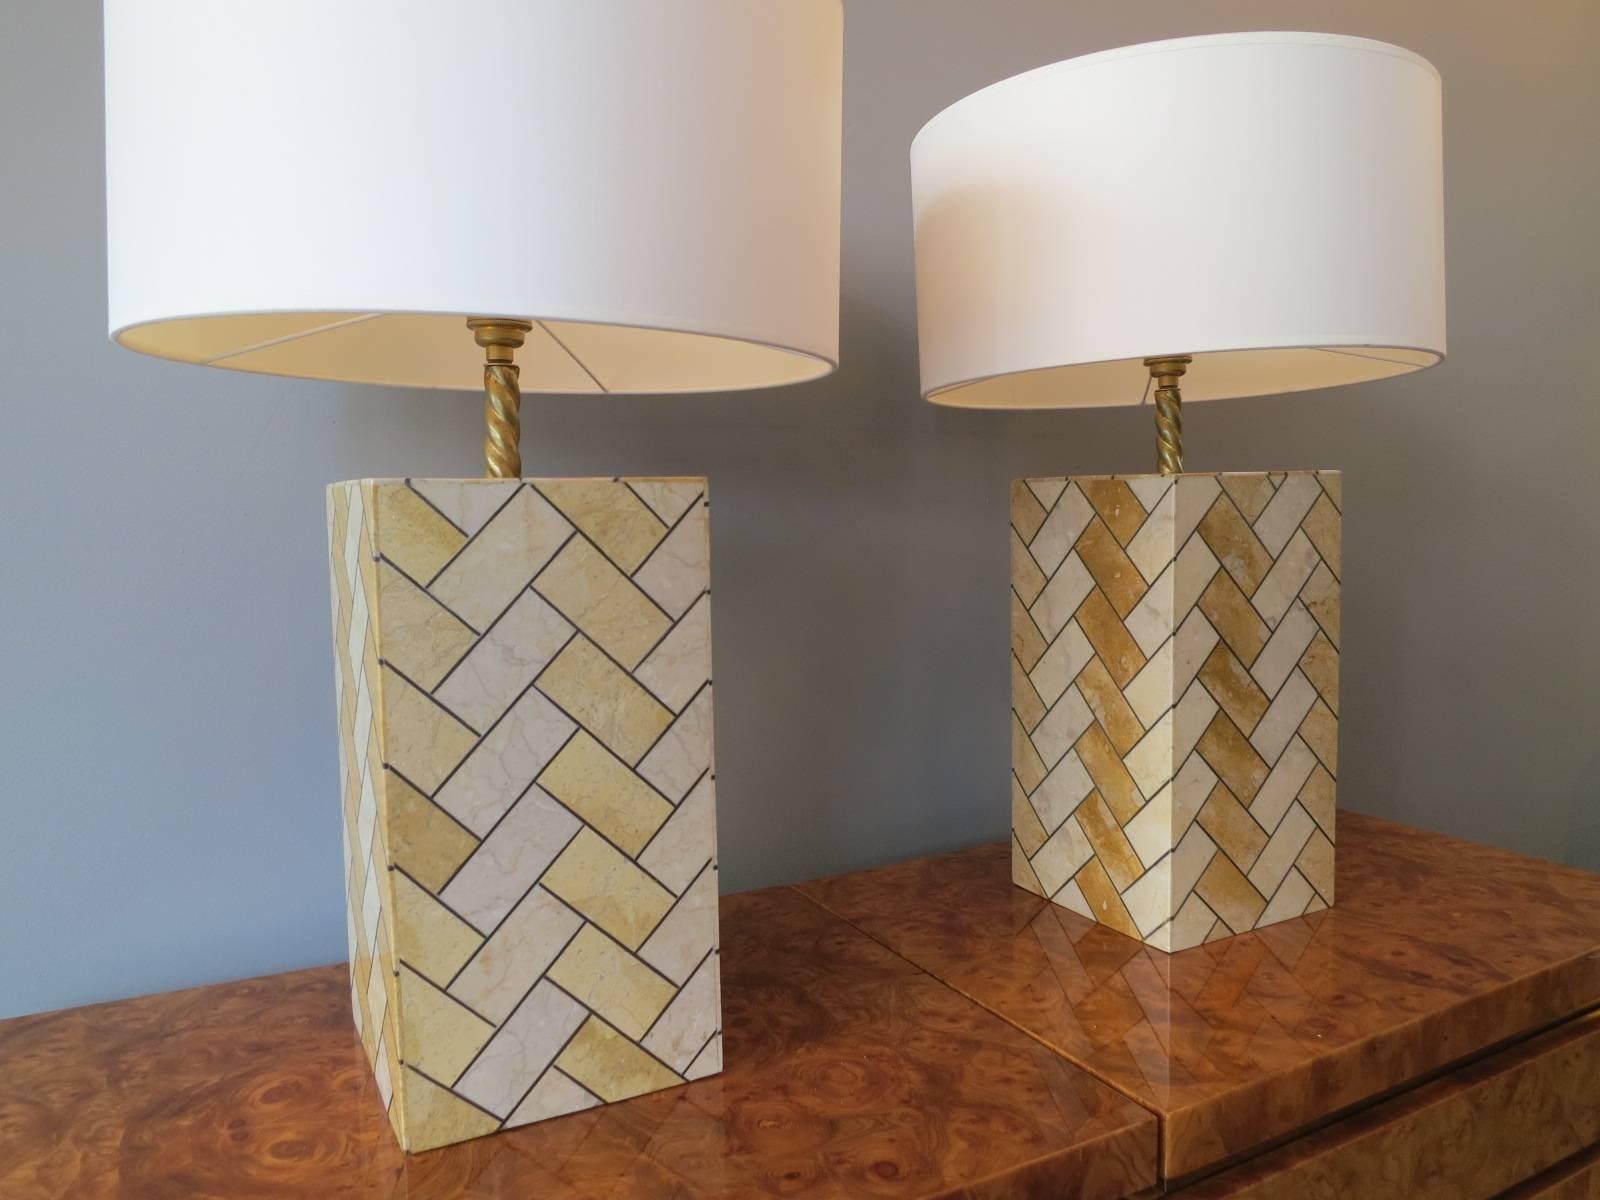 A pair of inlaid herringbone patterned table lamps in marble and brass with circular white shades and silk flex, late 20th century

Sizes given including shade.